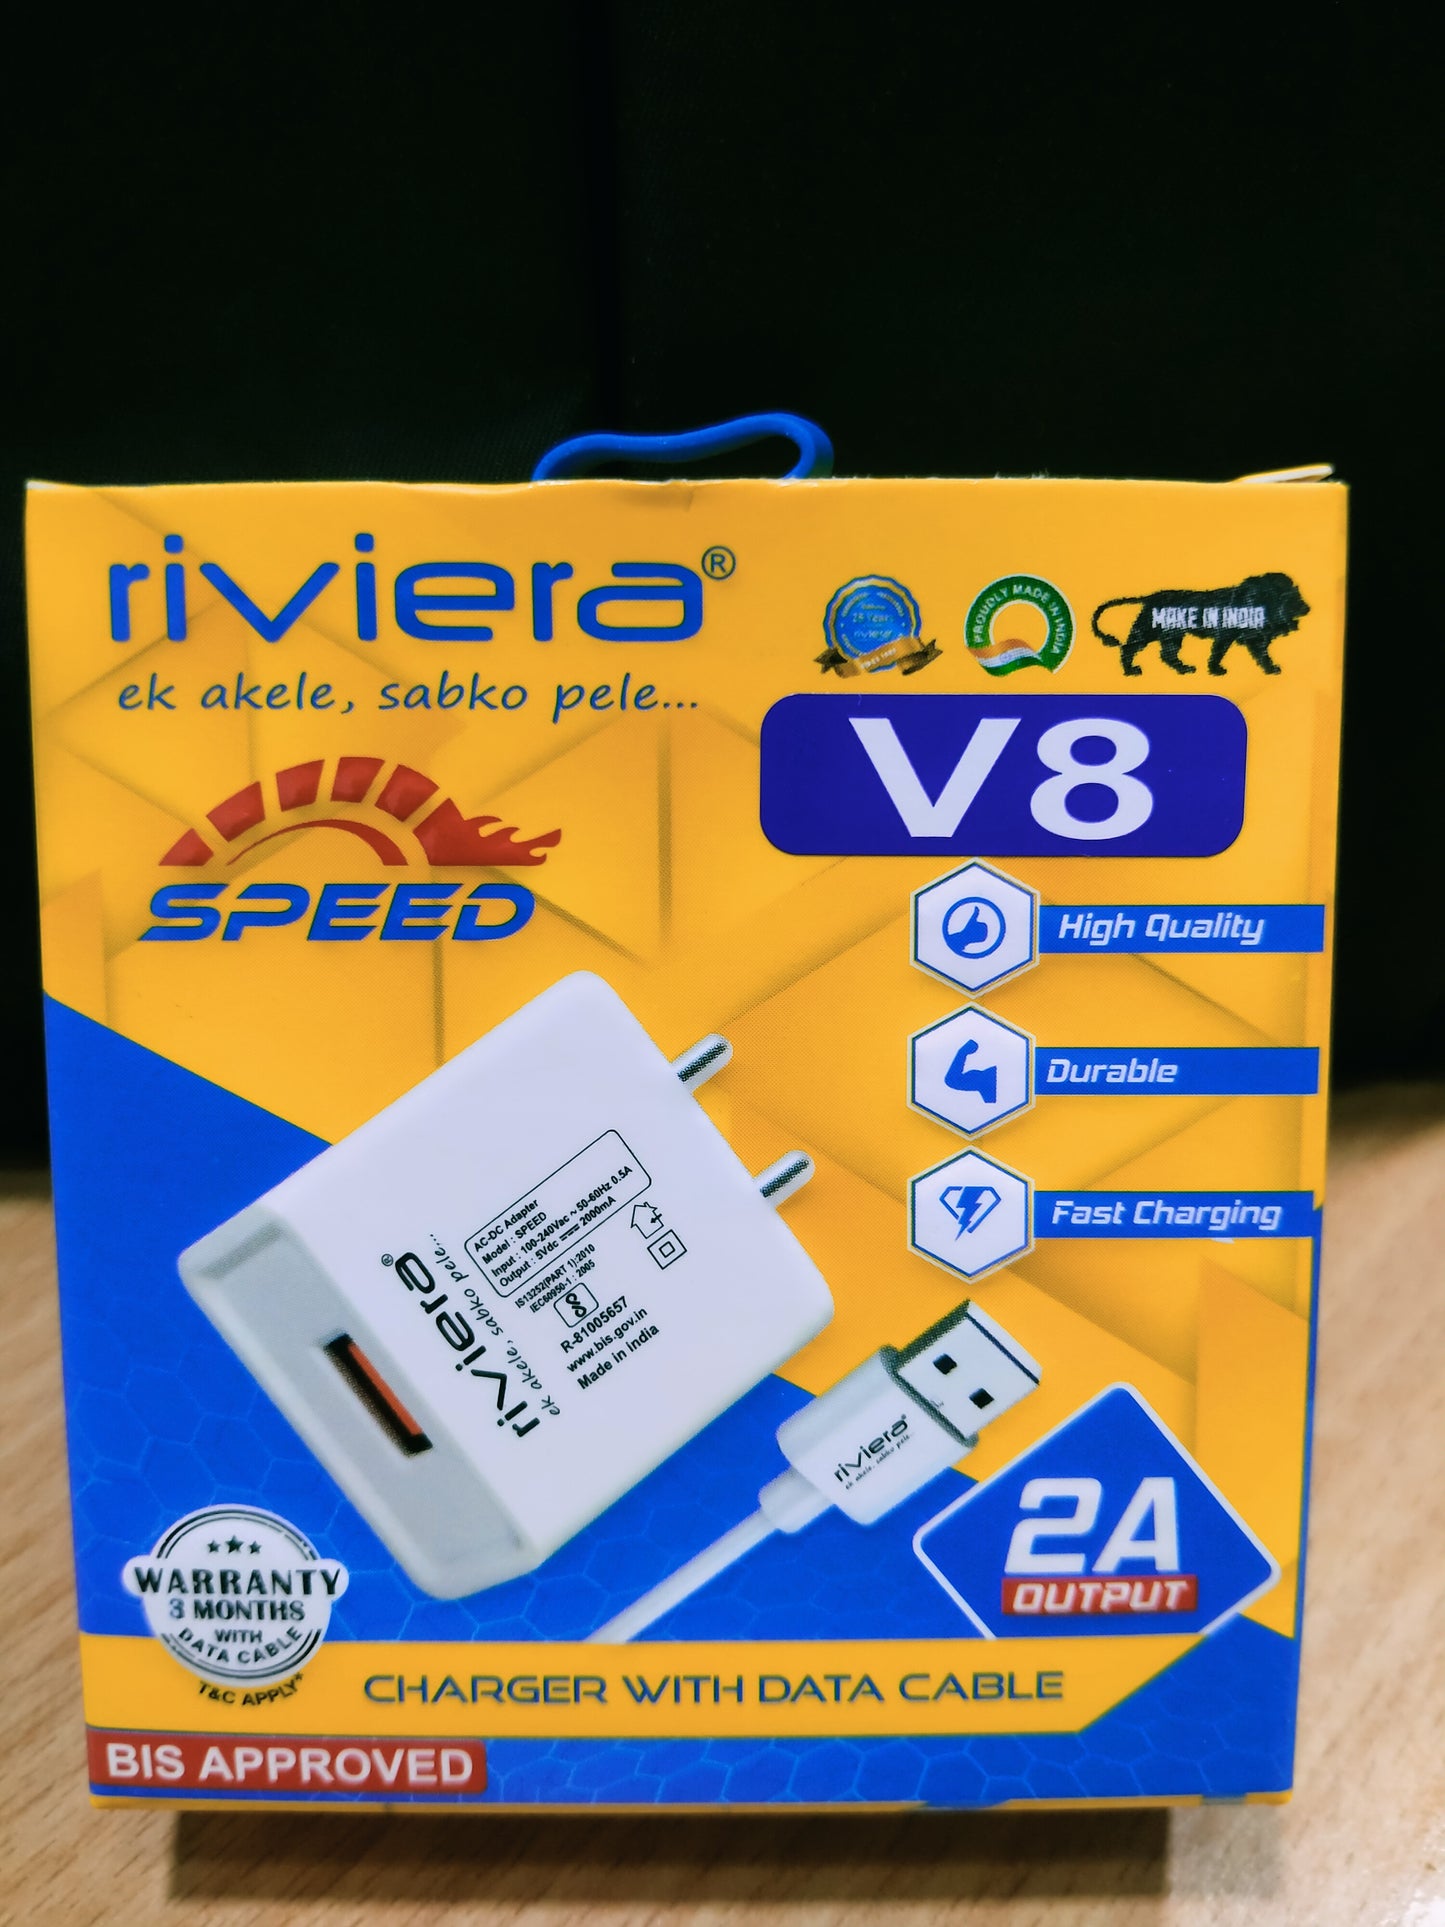 RIVIERA SPEED V8/micro, 2A charger- cross bag free on 20 pcs charger